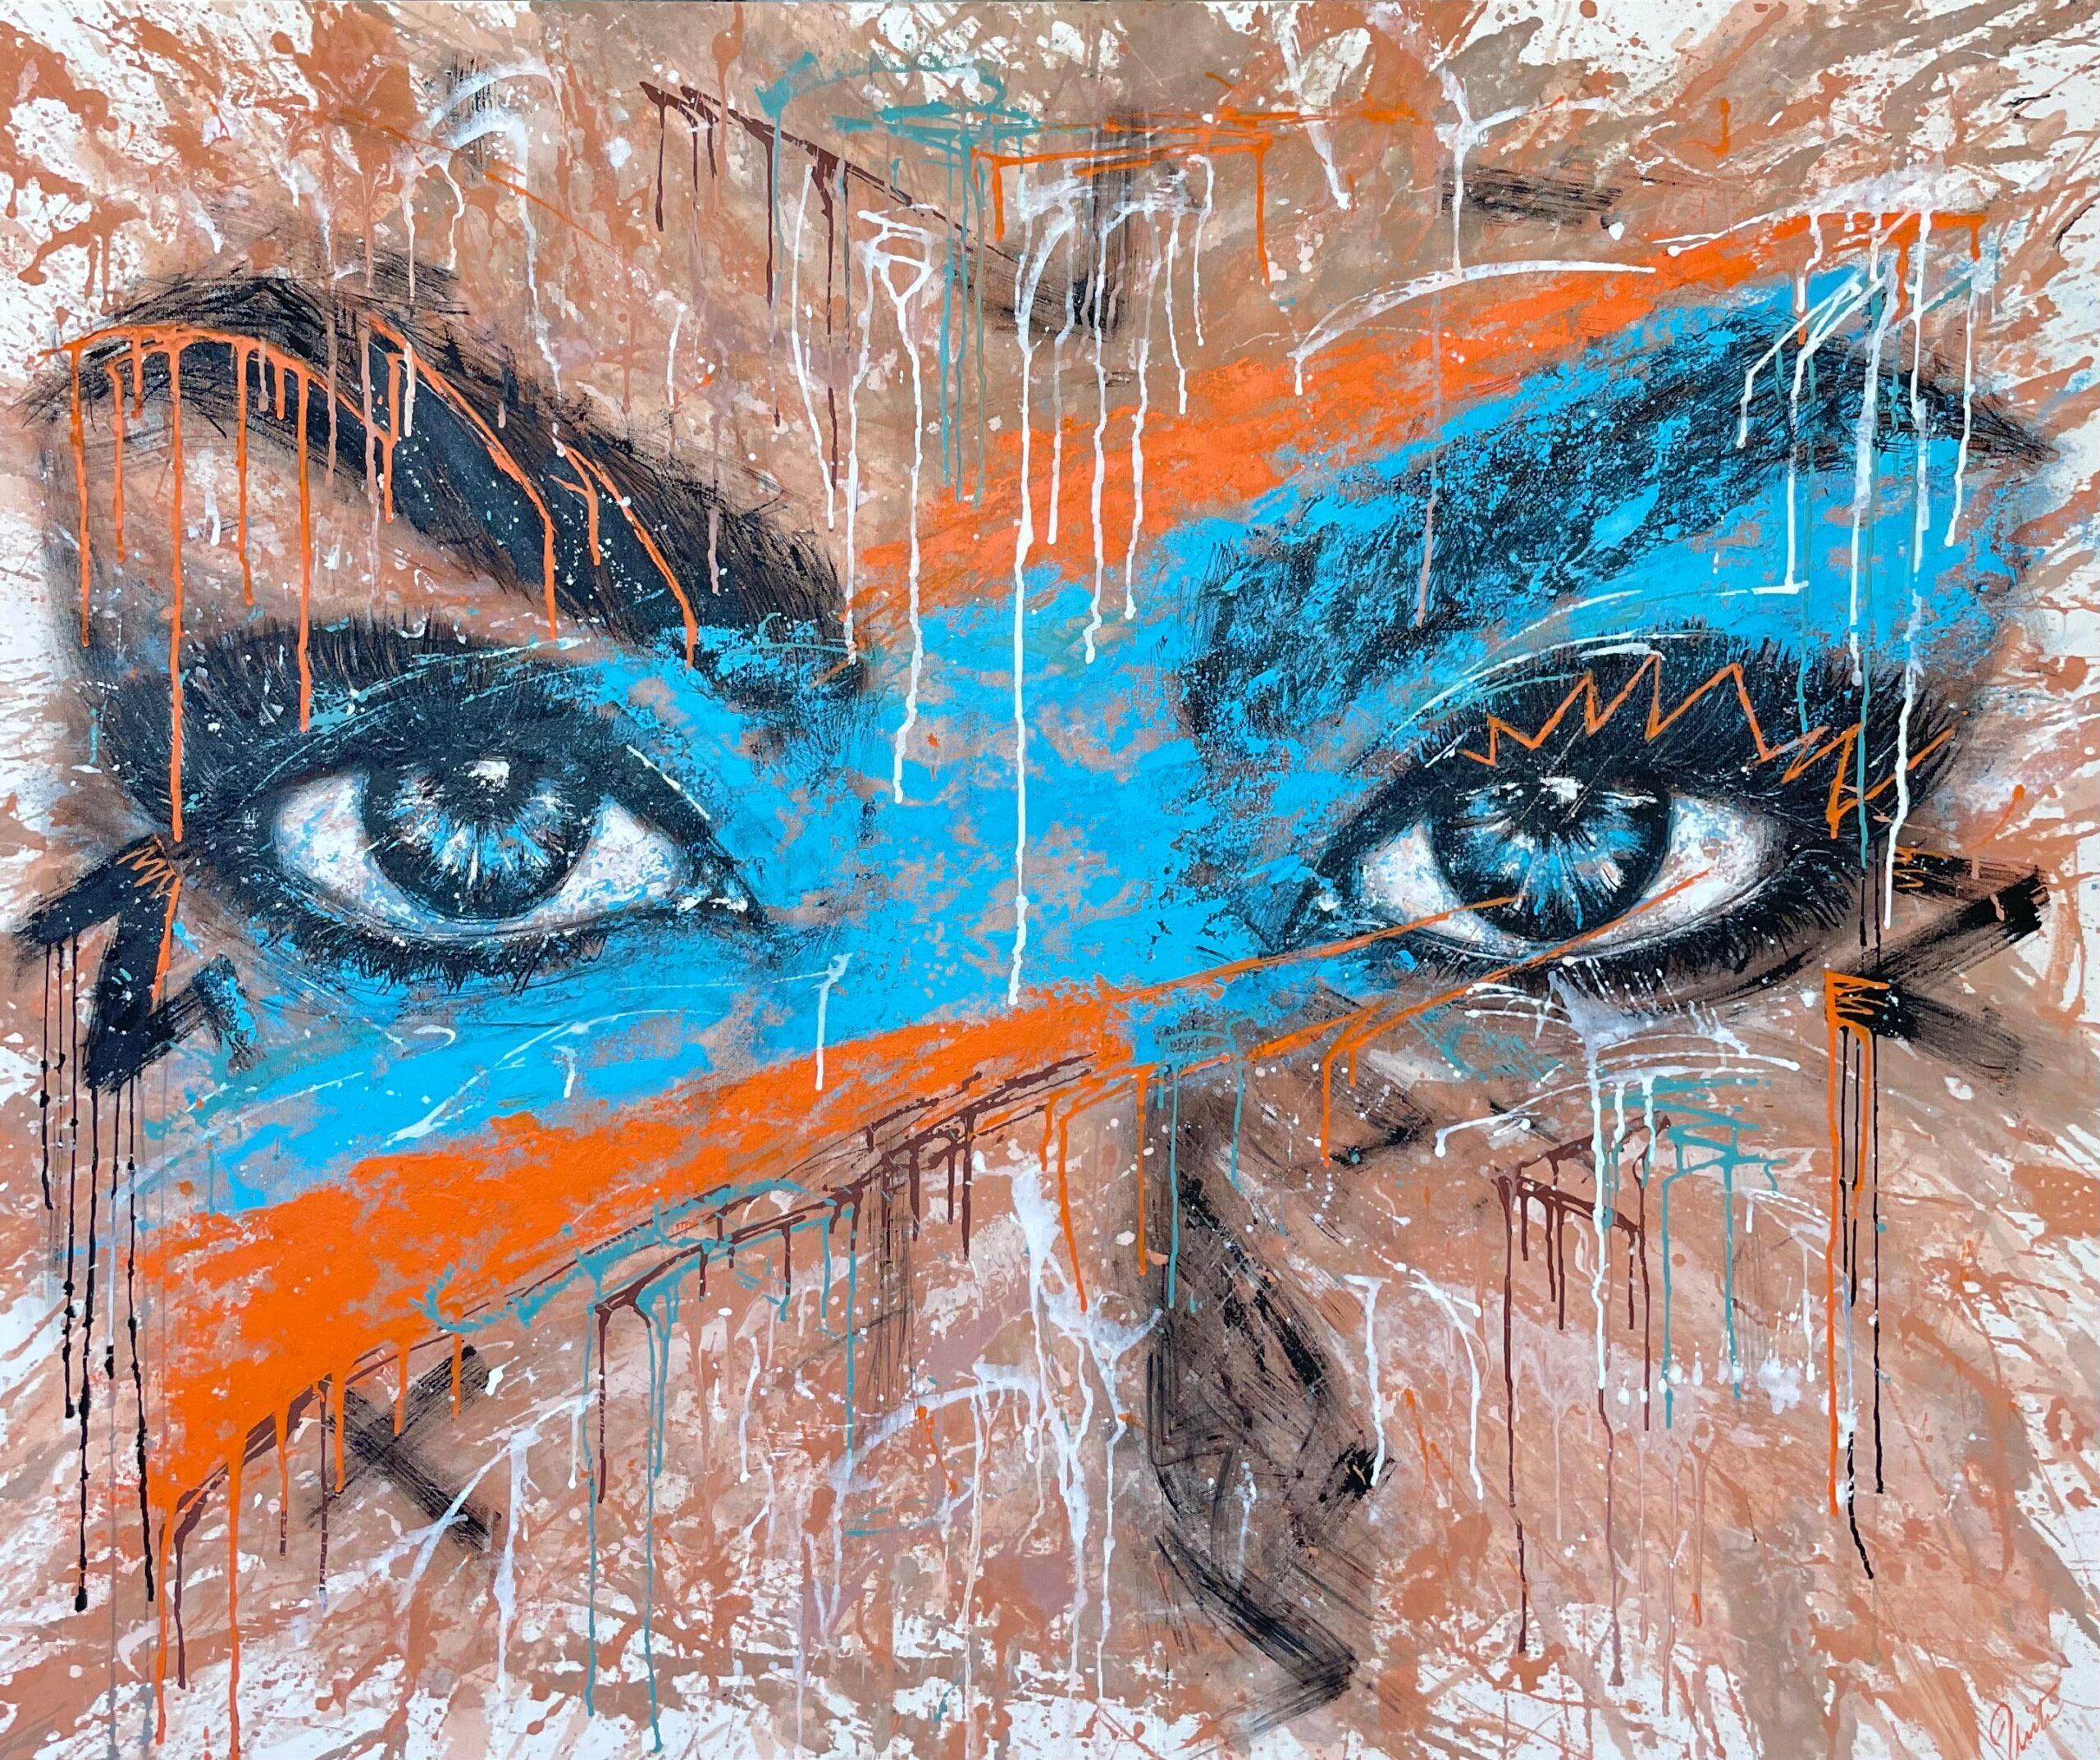 I SEE YOU by Armita A. Hüsecken - Painting by Unknown